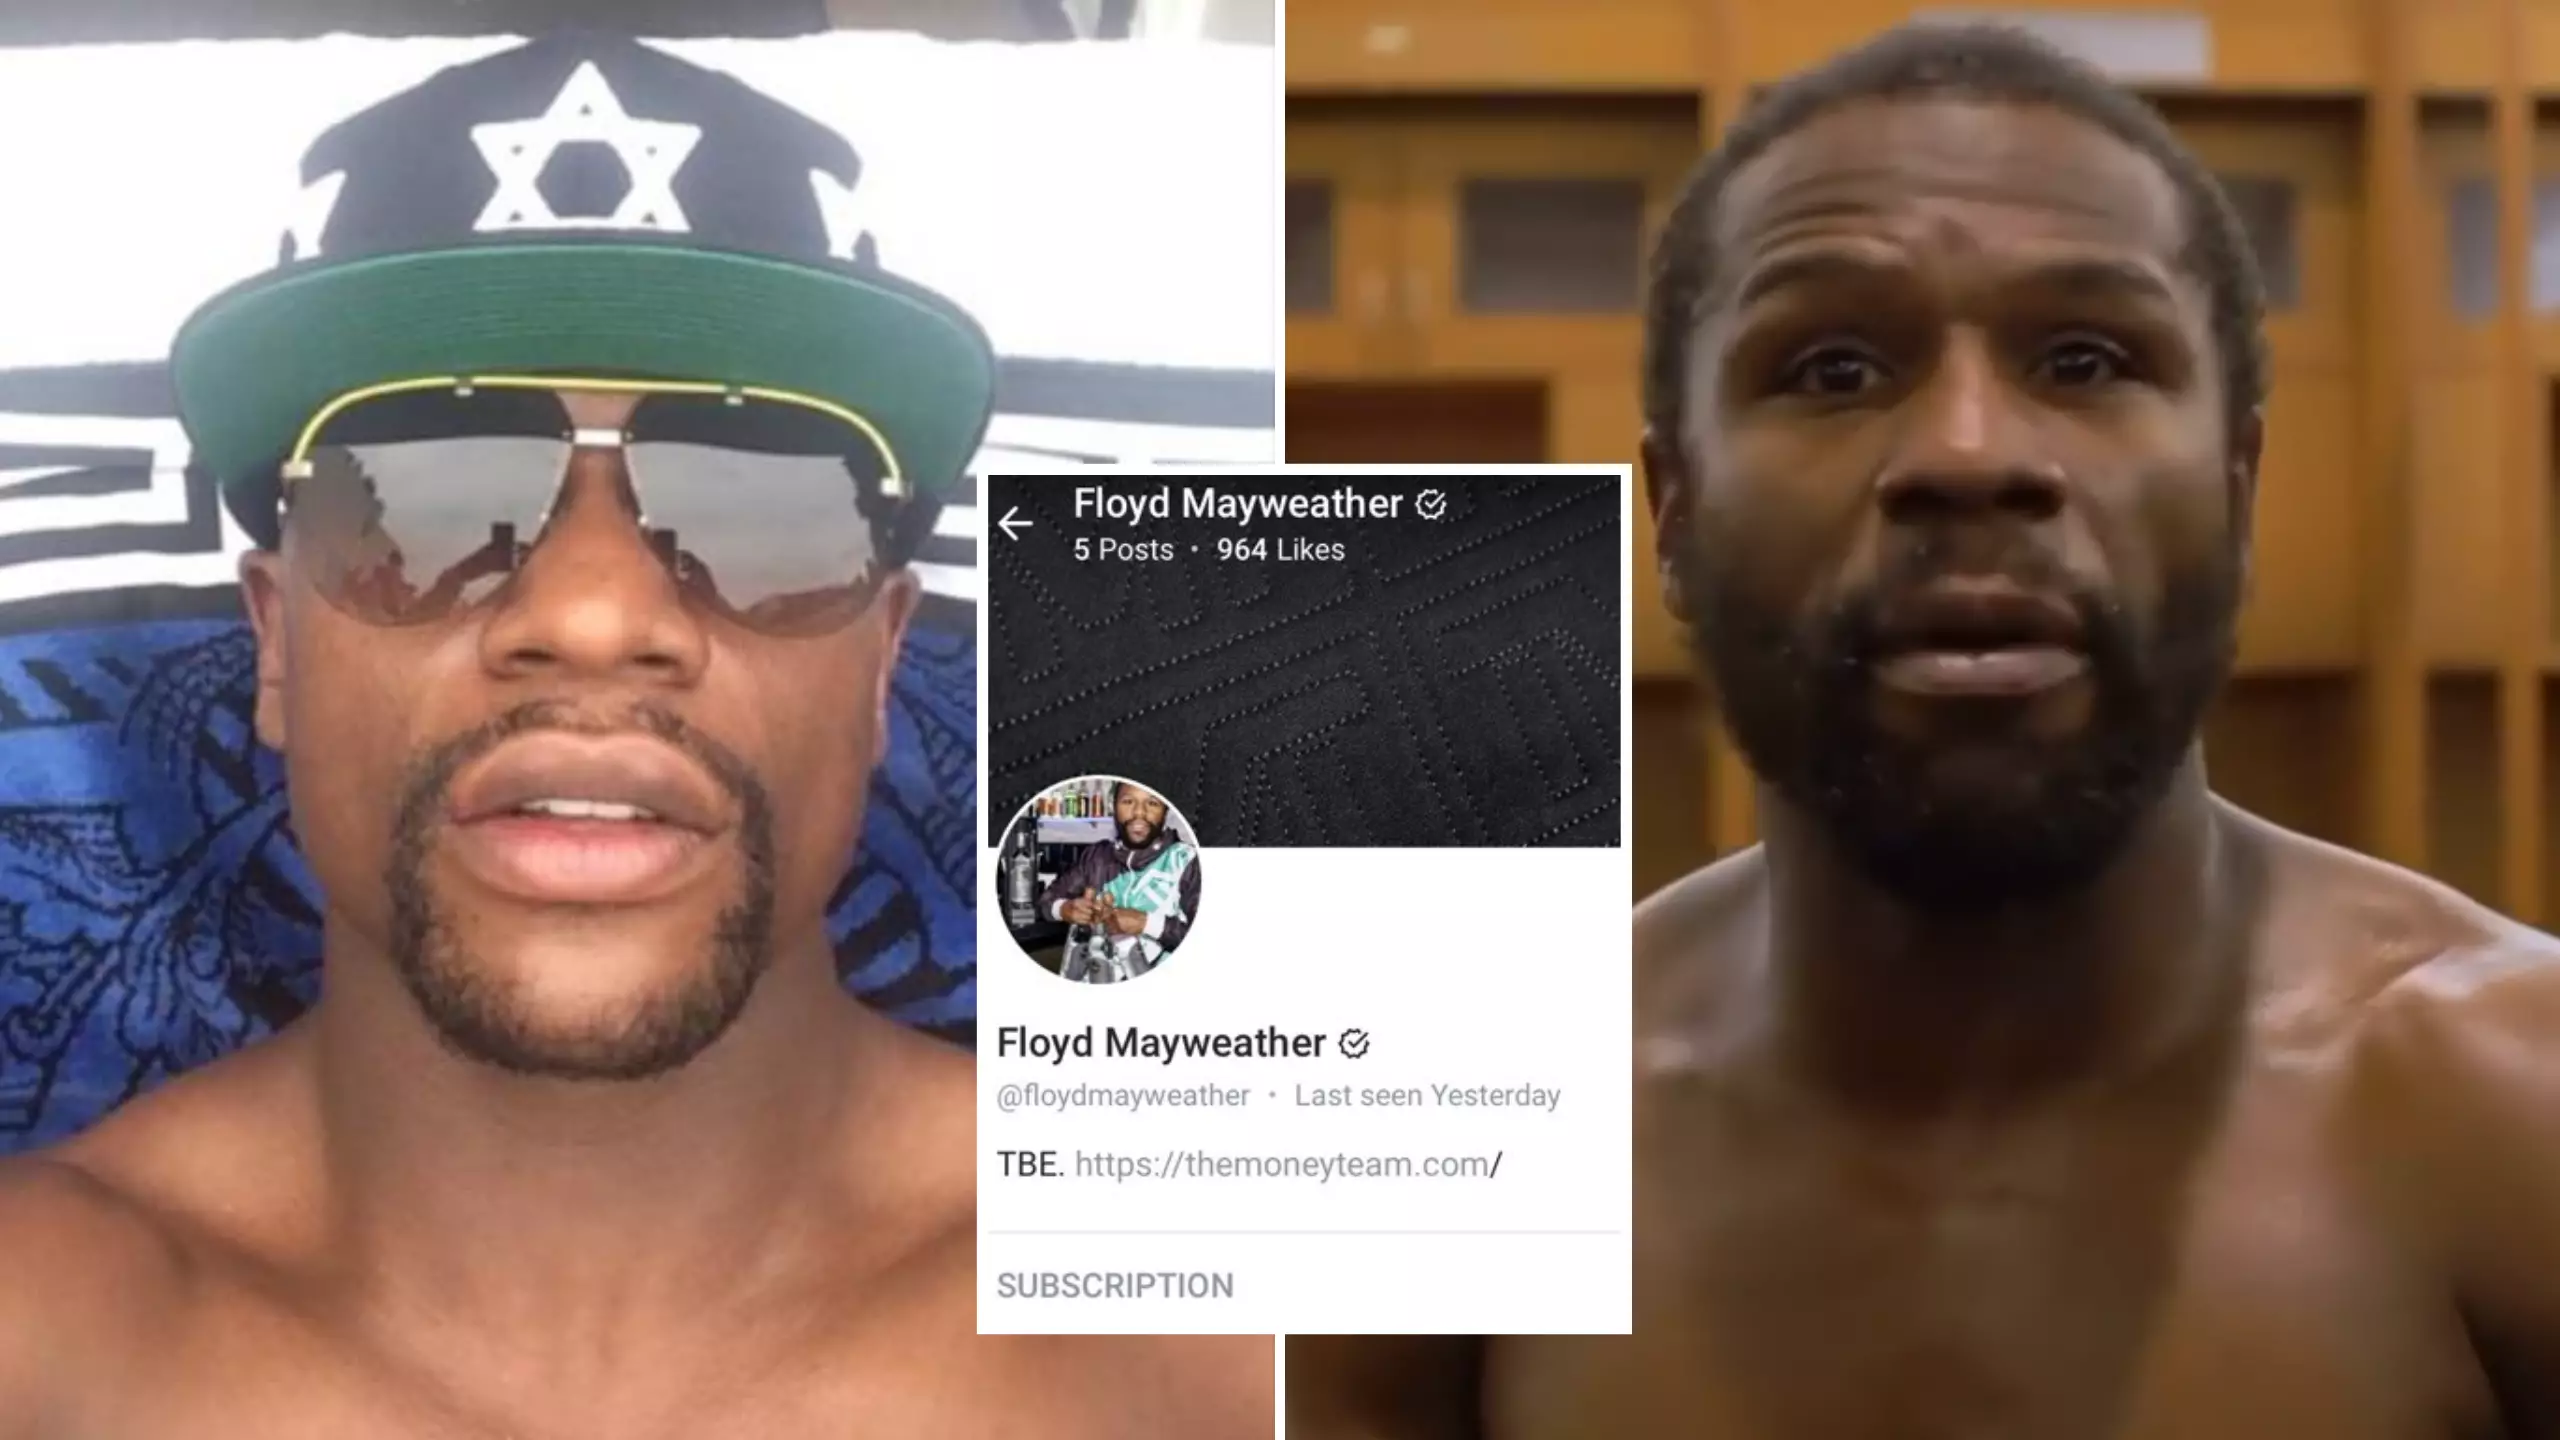 Floyd Mayweather Has Started His Own OnlyFans Page With 'Exclusive Content'